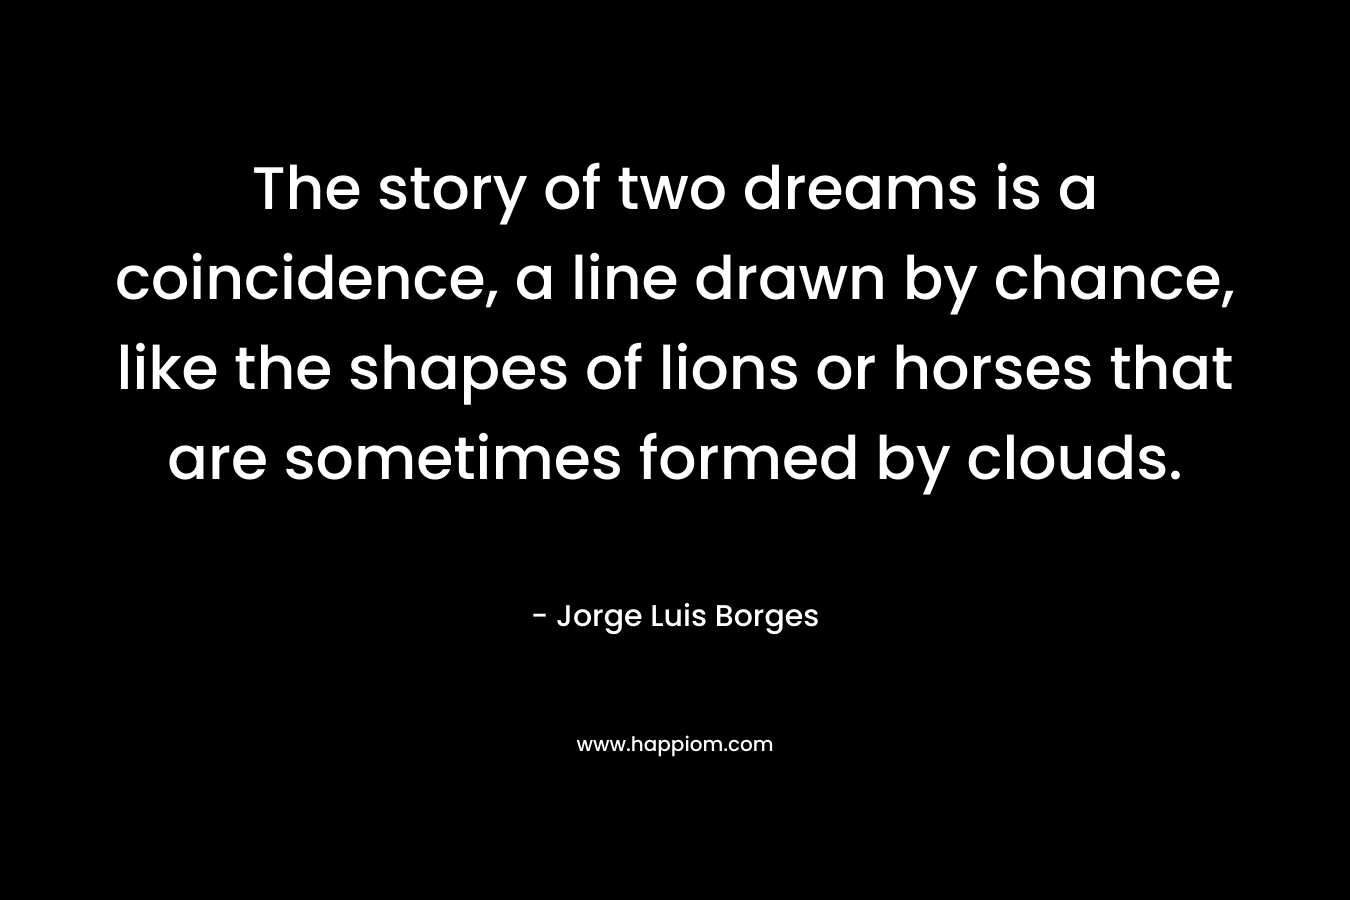 The story of two dreams is a coincidence, a line drawn by chance, like the shapes of lions or horses that are sometimes formed by clouds. – Jorge Luis Borges